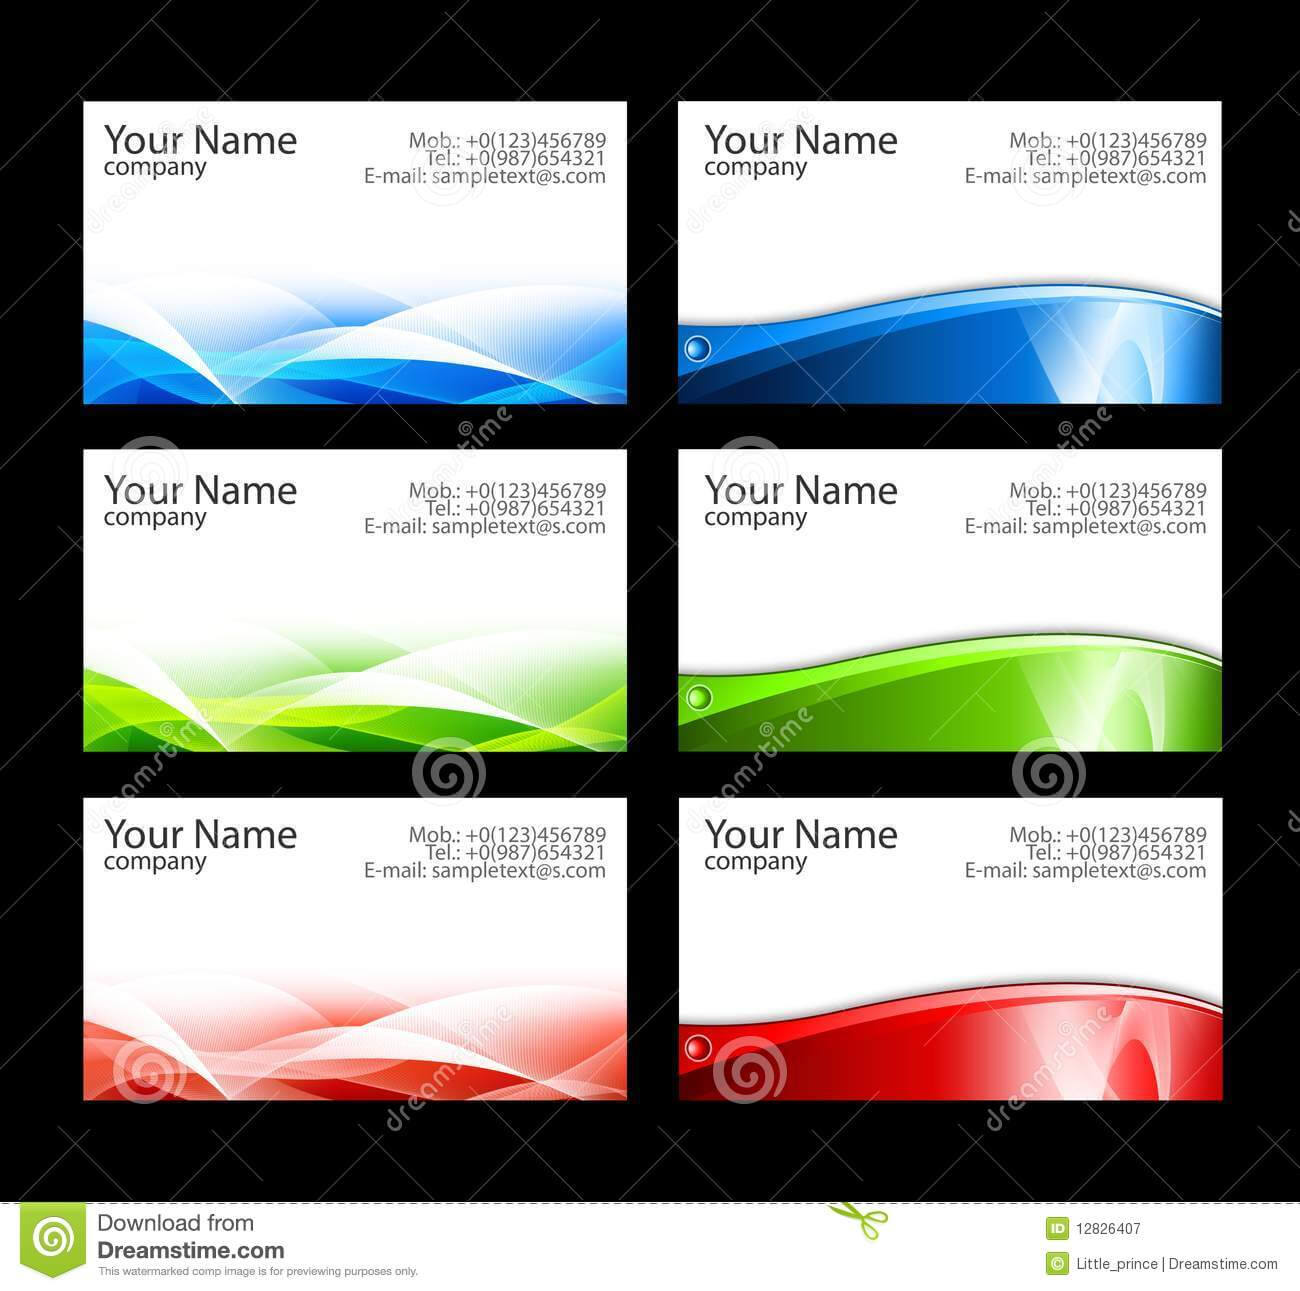 Business Cards Templates Stock Illustration. Illustration Of For Templates For Visiting Cards Free Downloads